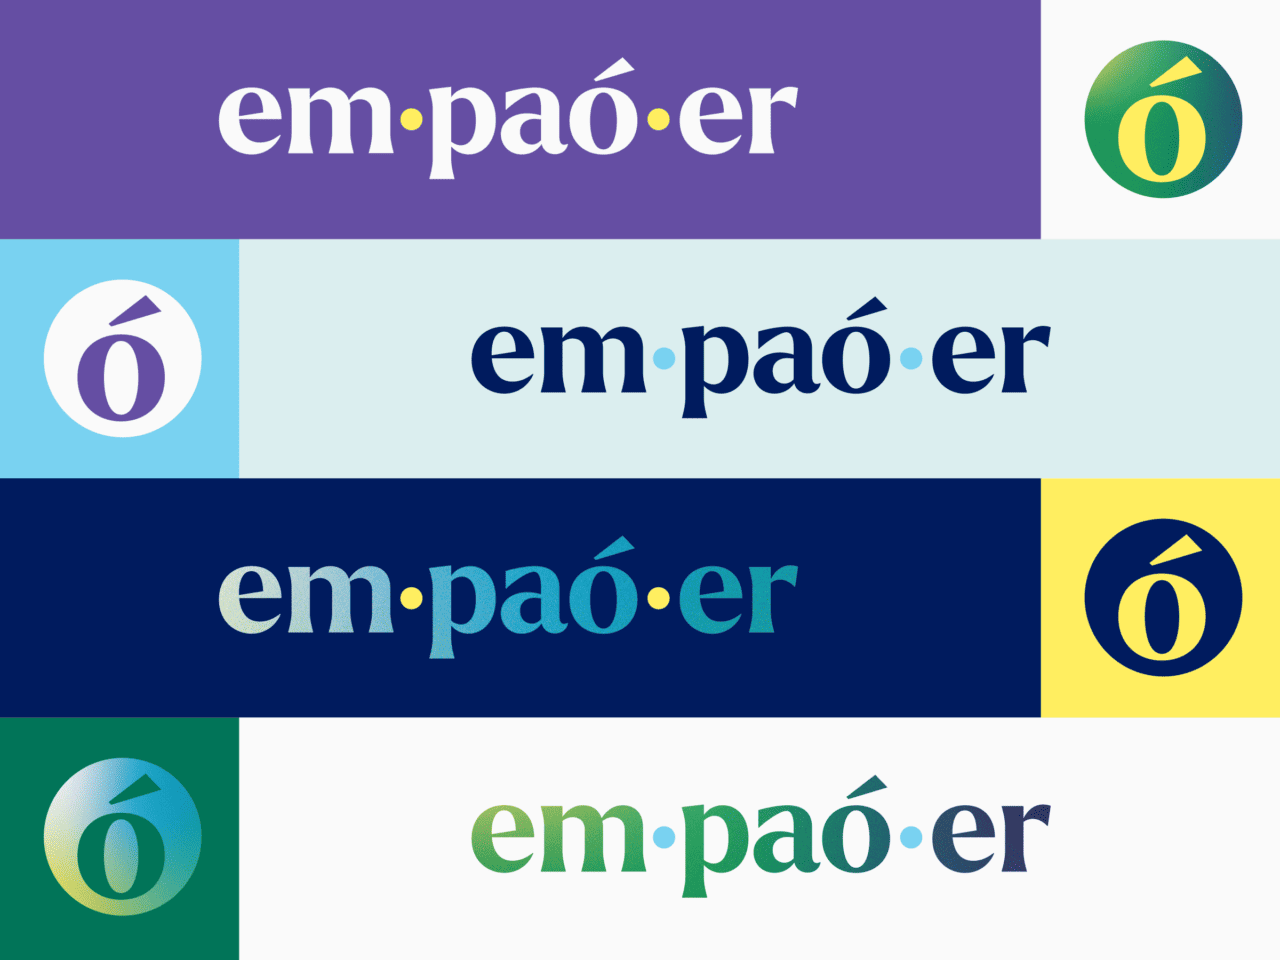 Empaoer logo and titles in branded fonts, in various branded colour high-contrast combinations